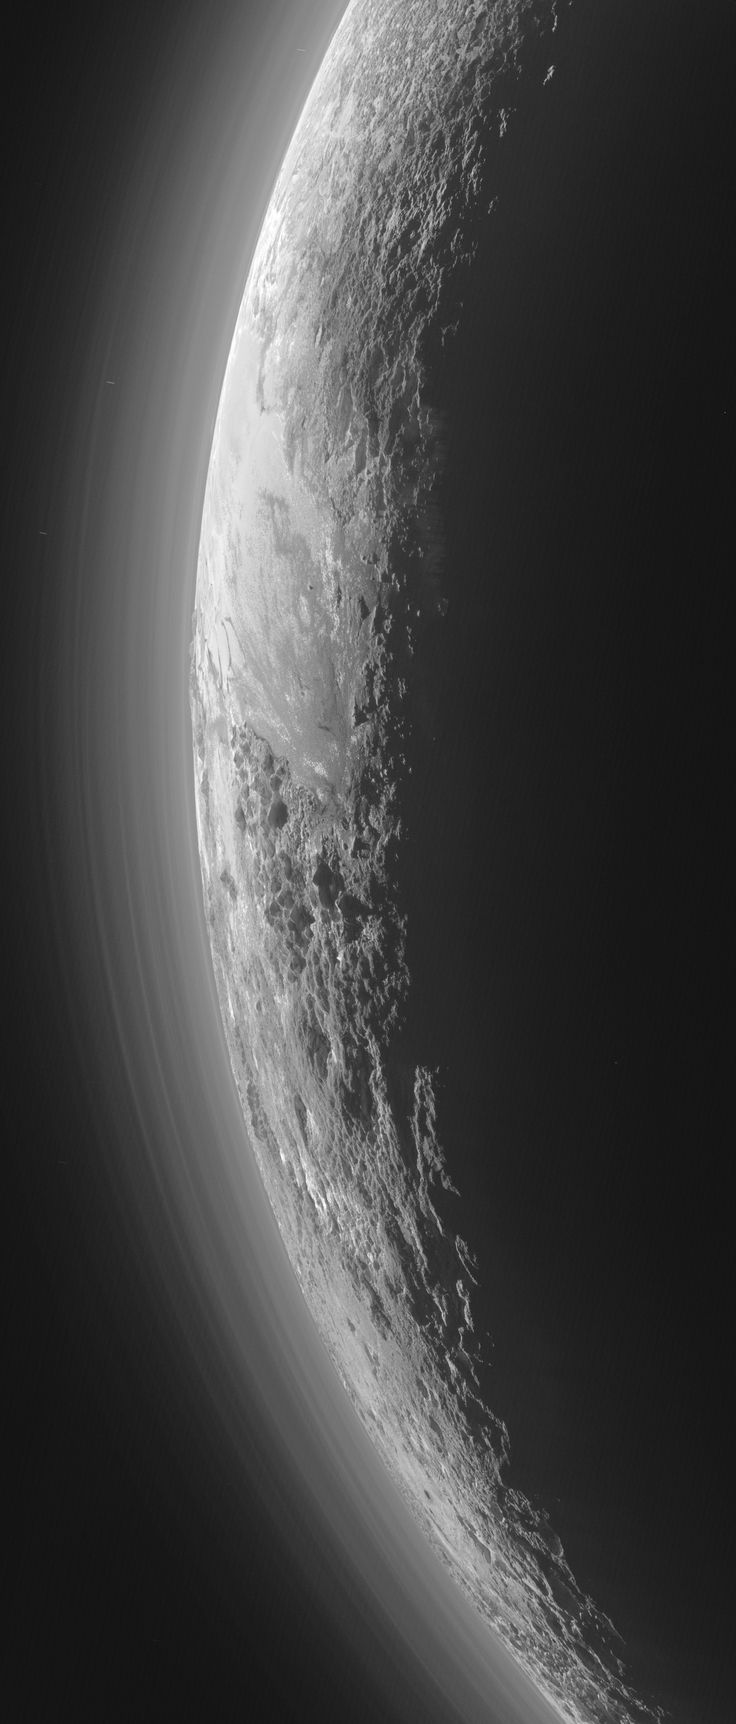 Only 15 minutes after its closest approach to Pluto on July 14, 2015, NASAs New Horizons spacecraft looked back toward the sun and captured this near-sunset view of the rugged, icy mountains and flat ice plains extending to Plutos horizon. The smooth expanse of the informally named icy plain Sputnik Planum (right) is flanked on the left by rugged mountains up to 11,000 feet (3,500 meters) high, including the informally named Norgay Montes in the foreground and Hillary Montes on the